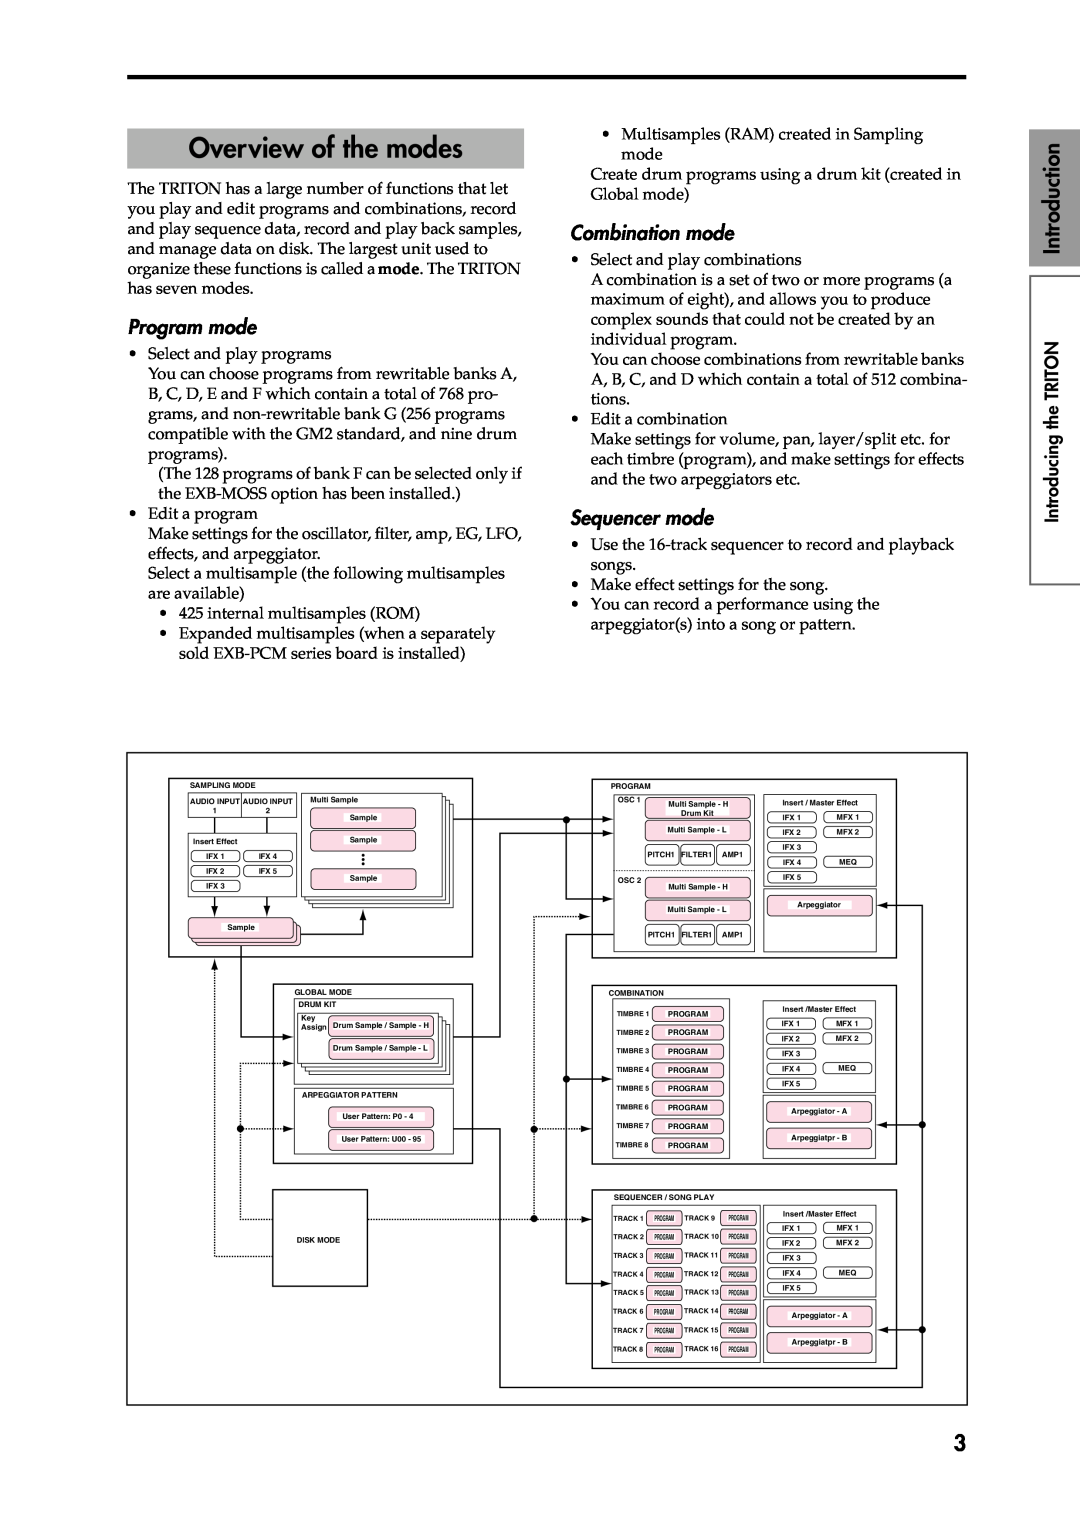 Korg Speaker System owner manual Overview of the modes, Program mode, Combination mode, Sequencer mode, Introduction 